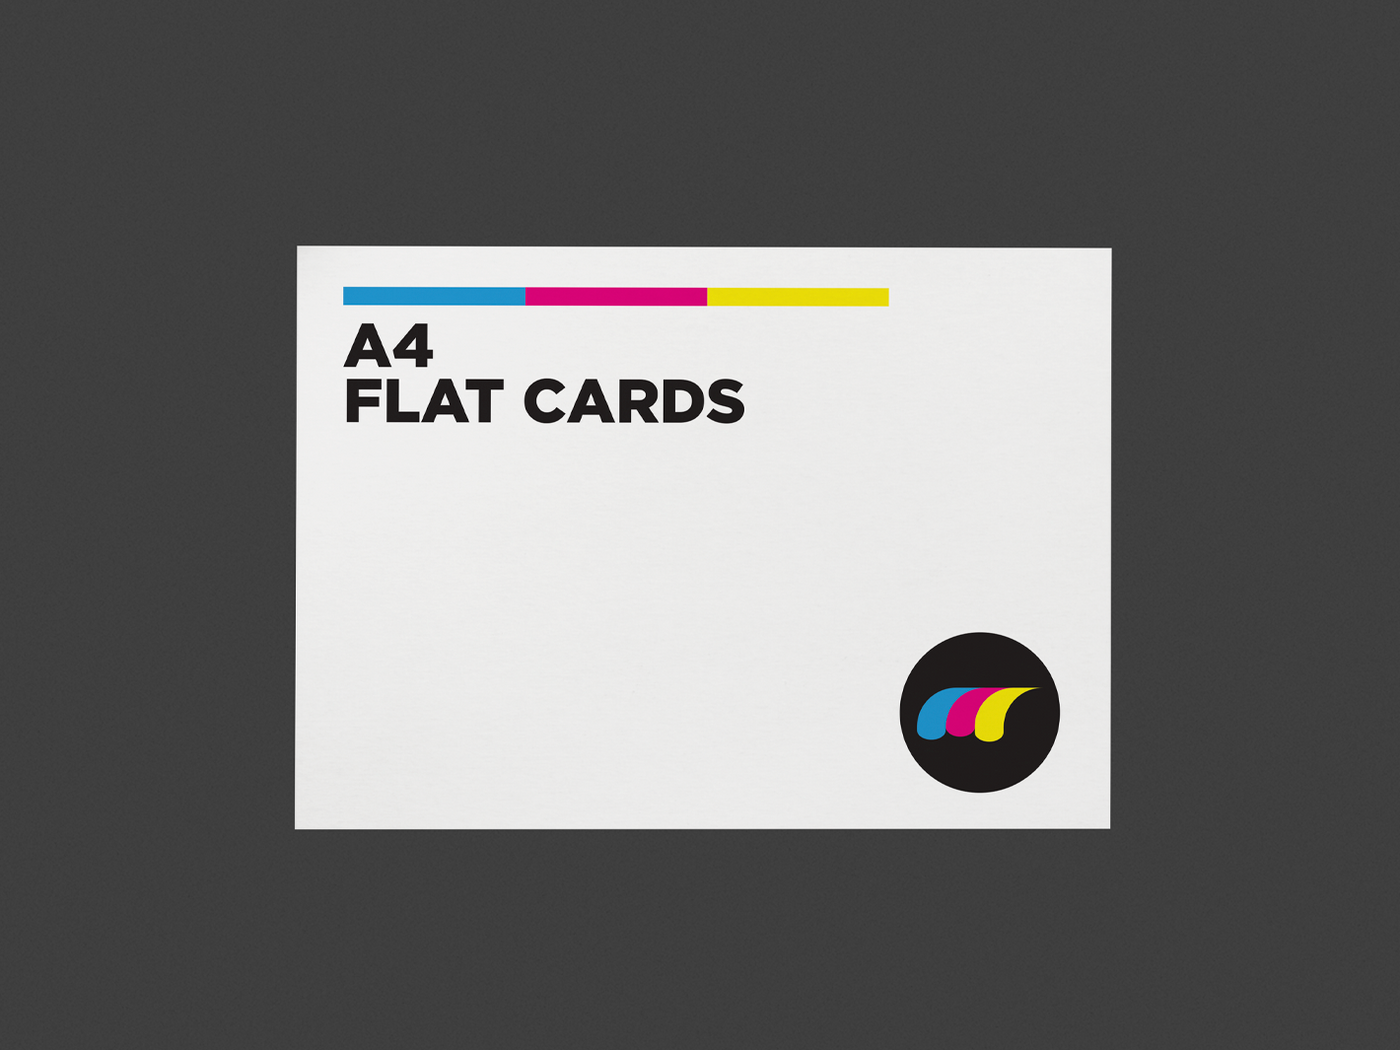 A4 Flat Cards